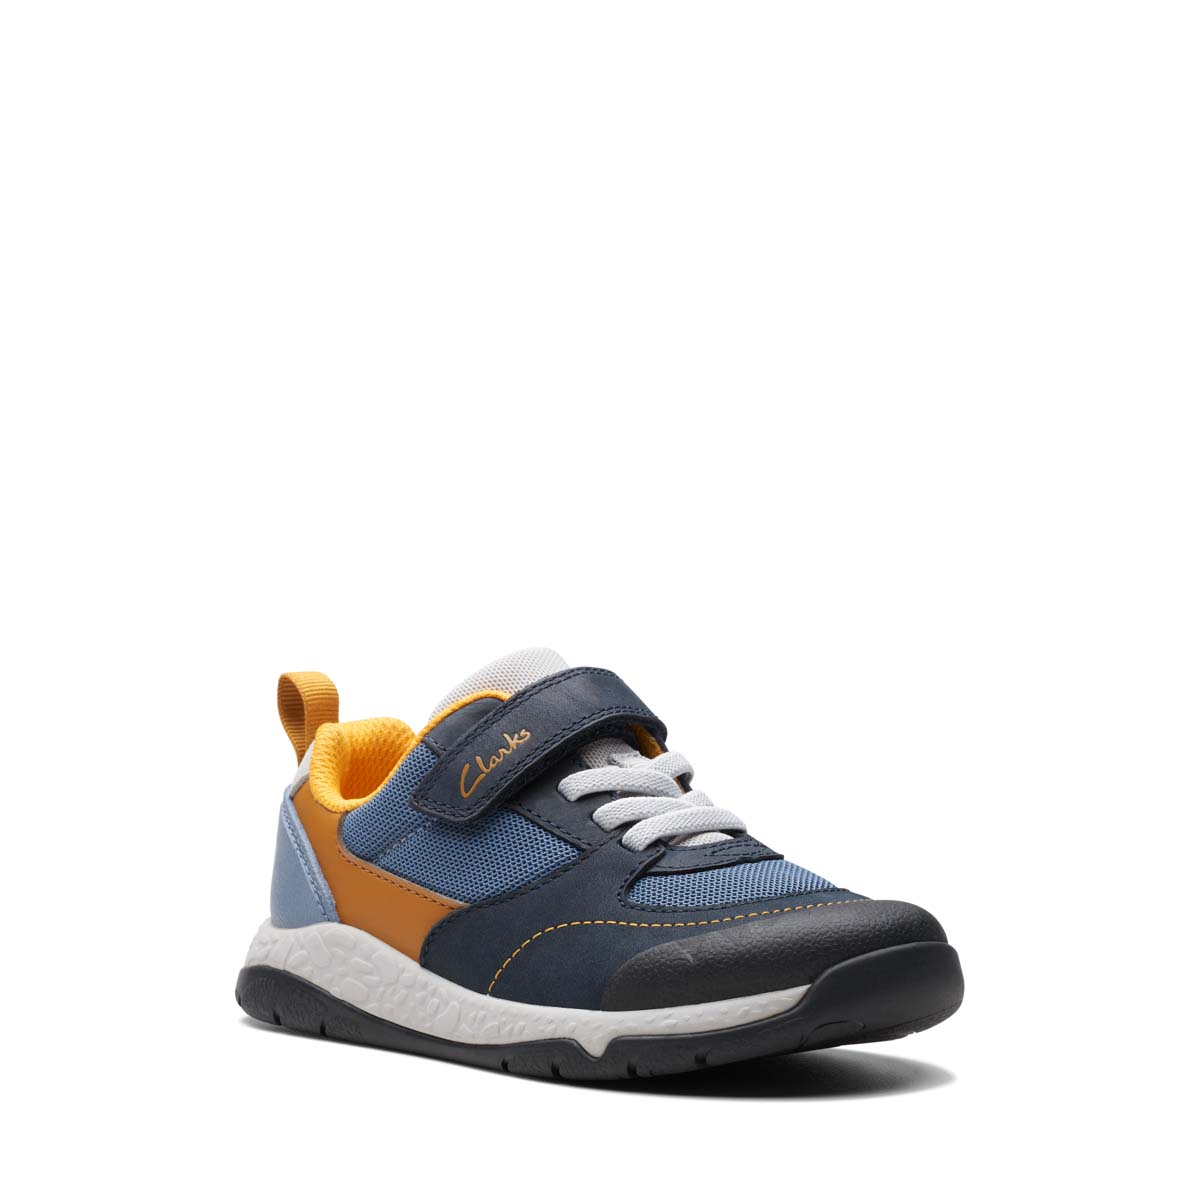 Clarks Steggy Stride K Navy Kids Boys Toddler Shoes 7514-16F in a Plain Leather and Textile in Size 10.5